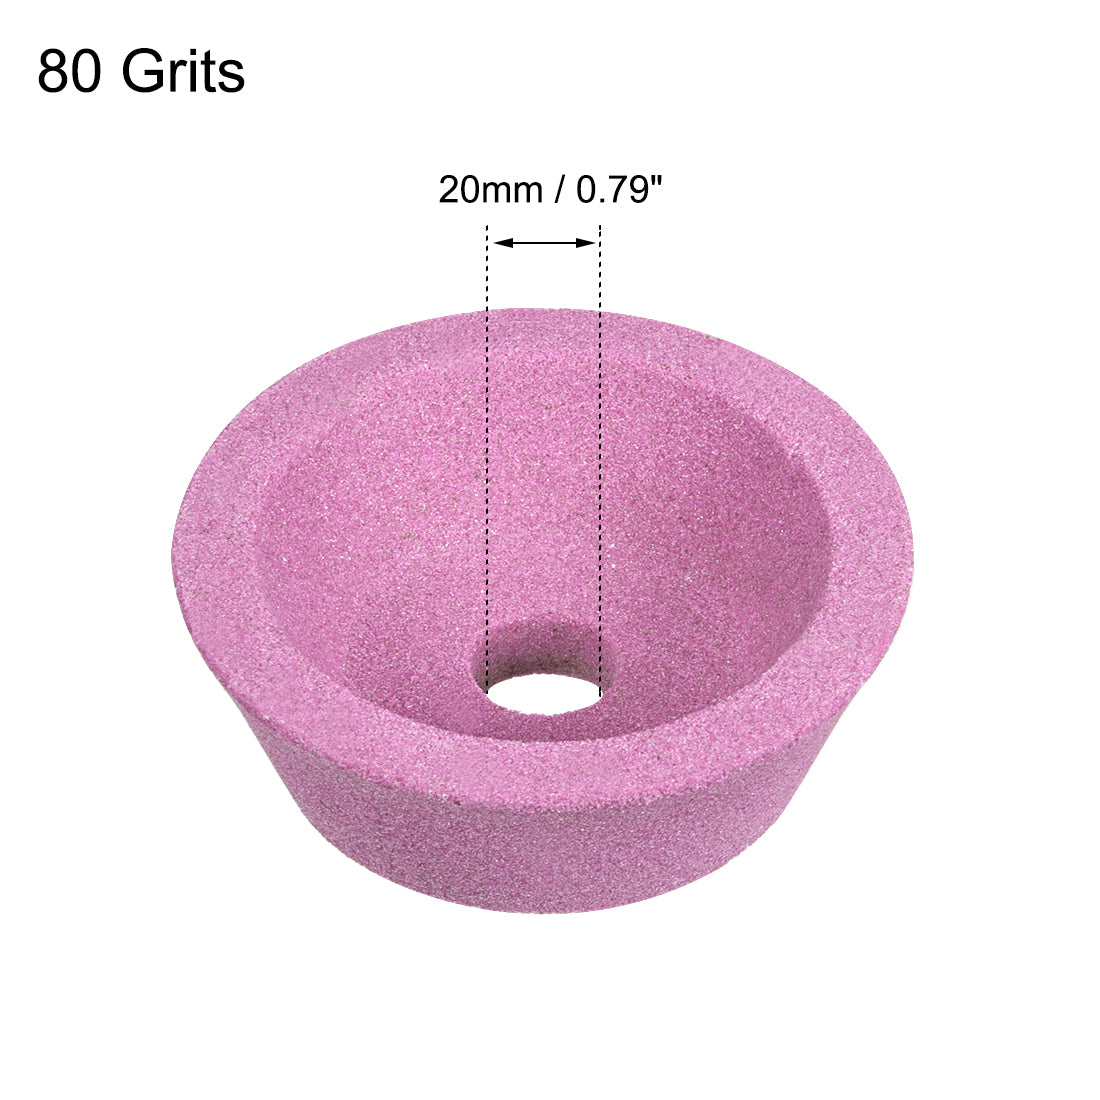 uxcell Uxcell 4-Inch Flaring Cup Grinding Wheel 80 Grits Pink Aluminum Oxide PA Surface Grinding Ceramic Tools